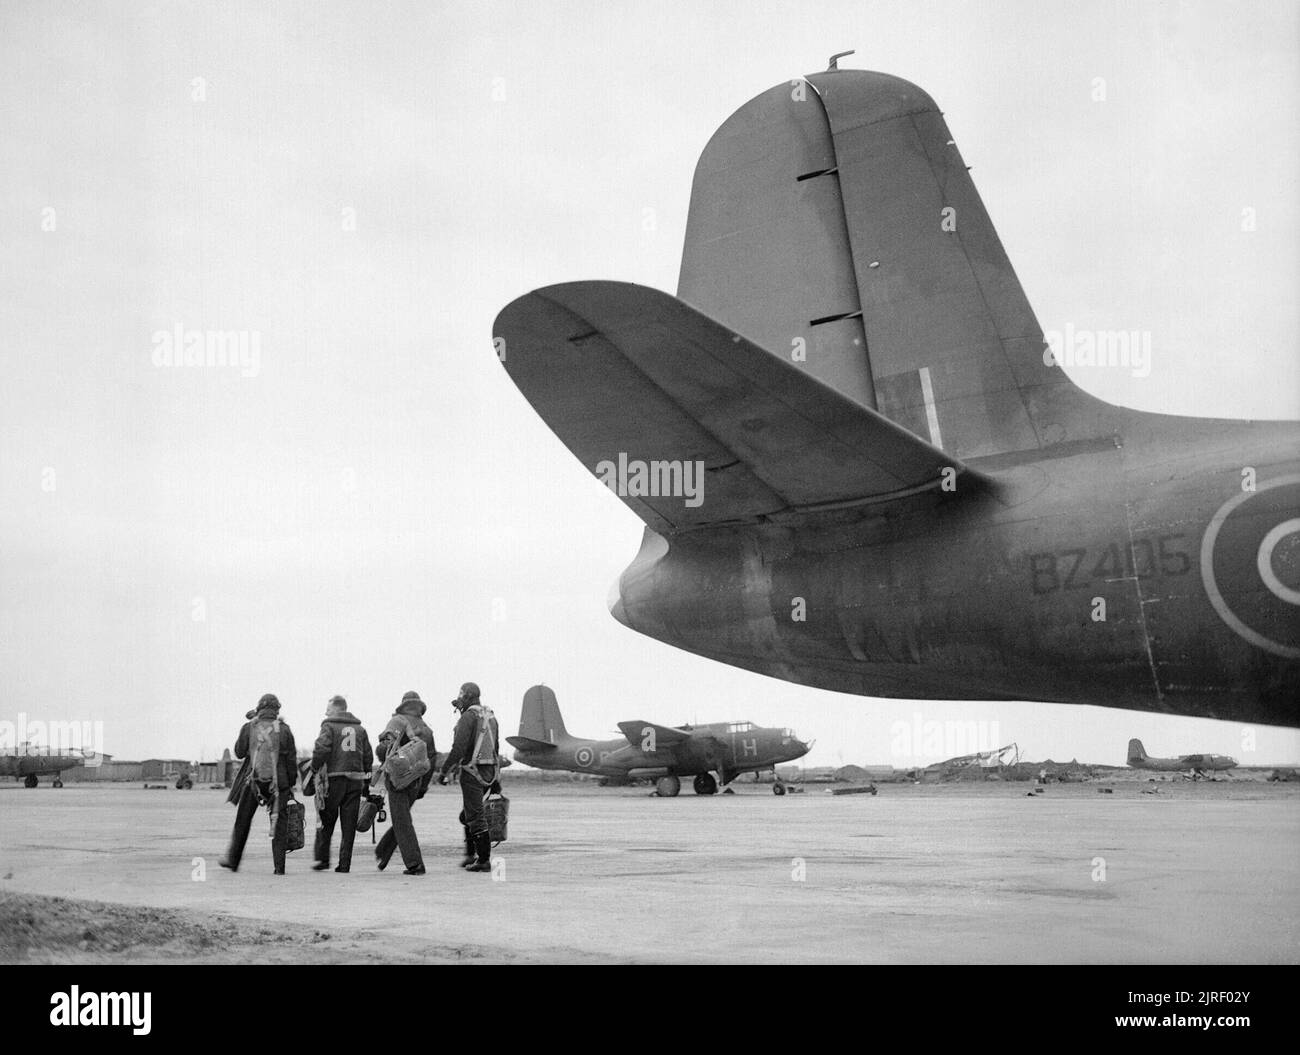 Royal Air Force- 2nd Tactical Air Force, 1943-1945. The last crew to return from the last operational mission undertaken by No. 88 Squadron RAF prior to its disbandment, walk away from their Douglas Boston Mark IV, BZ405 'RH-E', at B50/Vitry-en-Artois, France. The crew are, (left to right); Flying Officer J L Weston from Buenos Aires Flying Officer H Poole from Ilford, Essex Flying Officer B W Lawrence from Enfield, Middlesex Flight-Sergeant D Hack from Clevedon, Somerset 11 Bostons of the Squadron bombed enemy gun positions in the Emmerich area of Germany for this final mission. Stock Photo